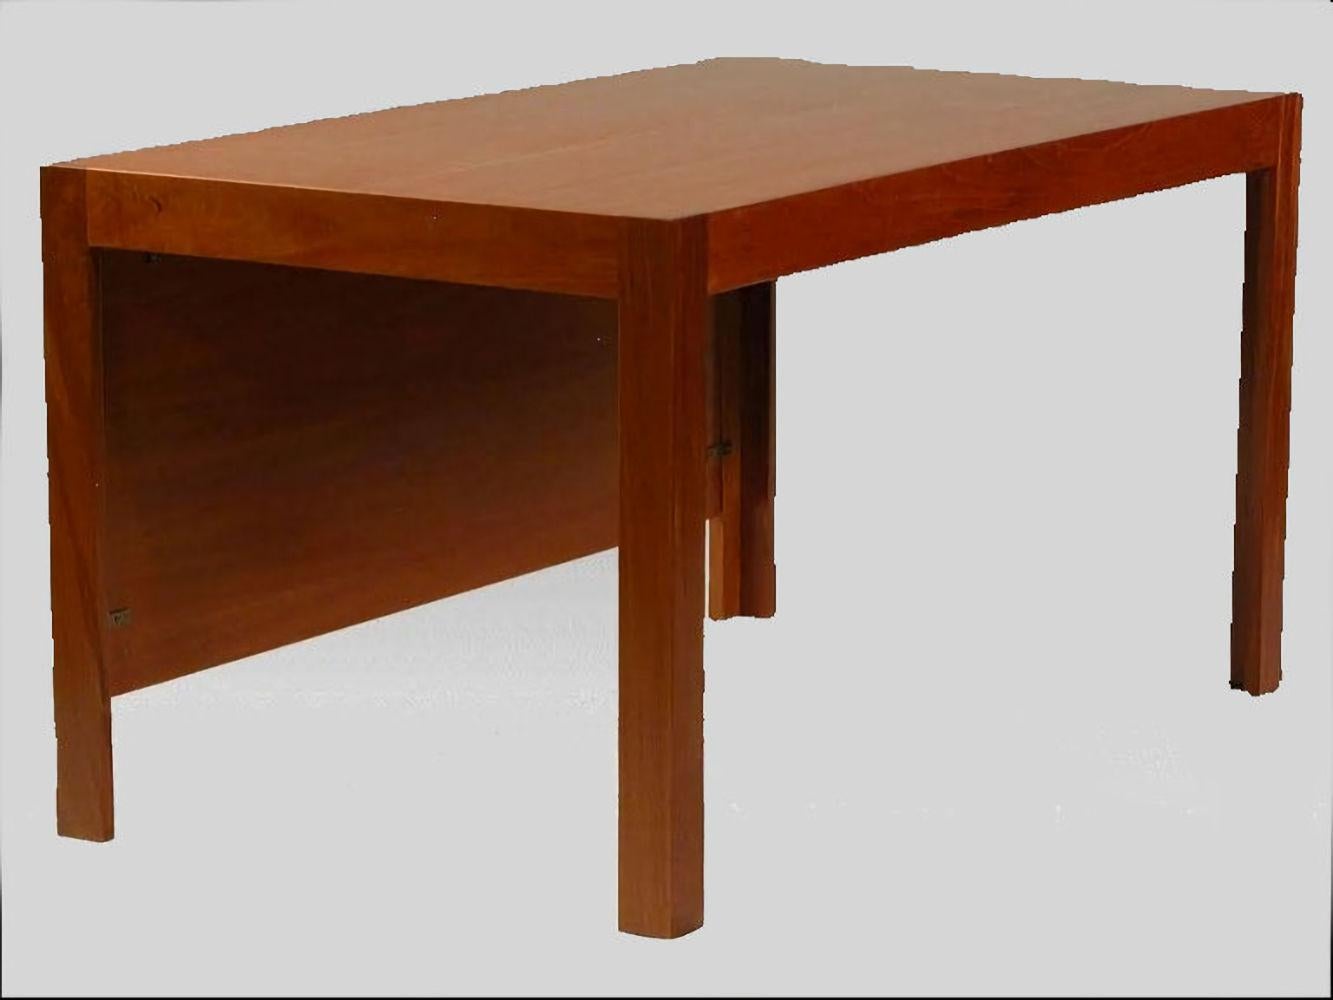 Scandinavian Modern 1980s Rud Thygesen and Johnny Sørensen Desk and Chair, Mahogany and Red Leather